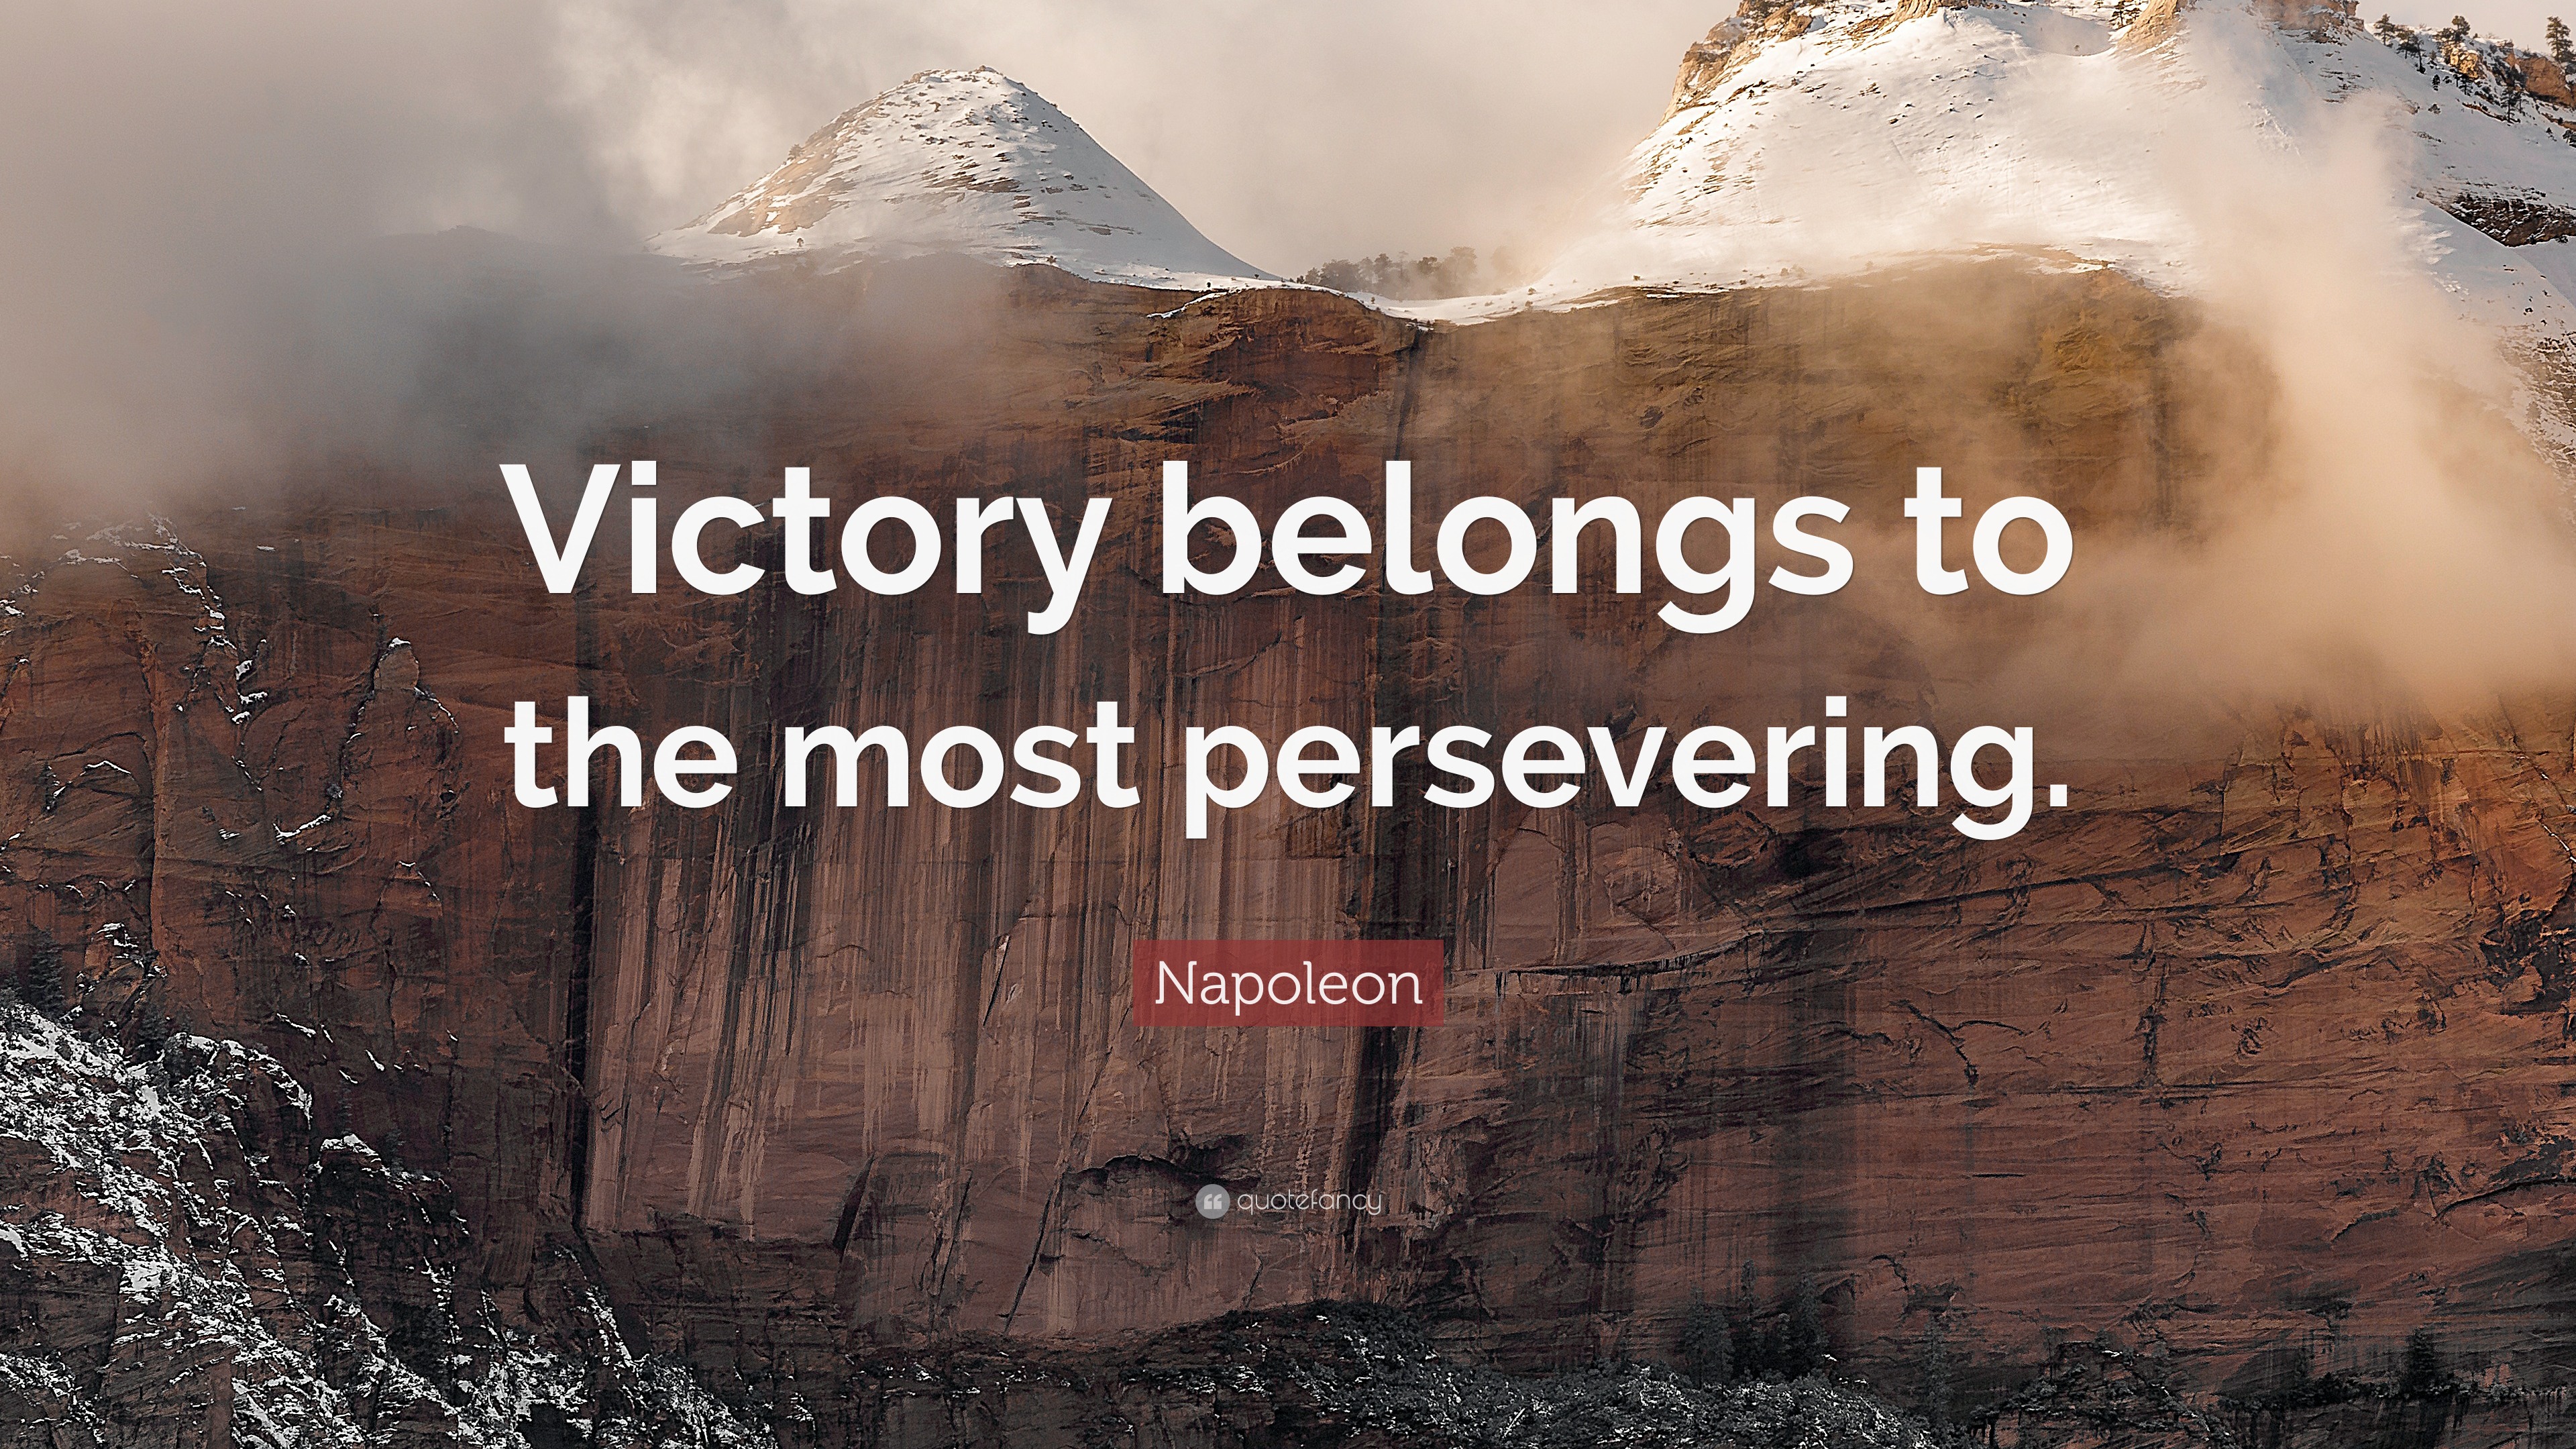 Napoleon Quote: "Victory belongs to the most persevering."